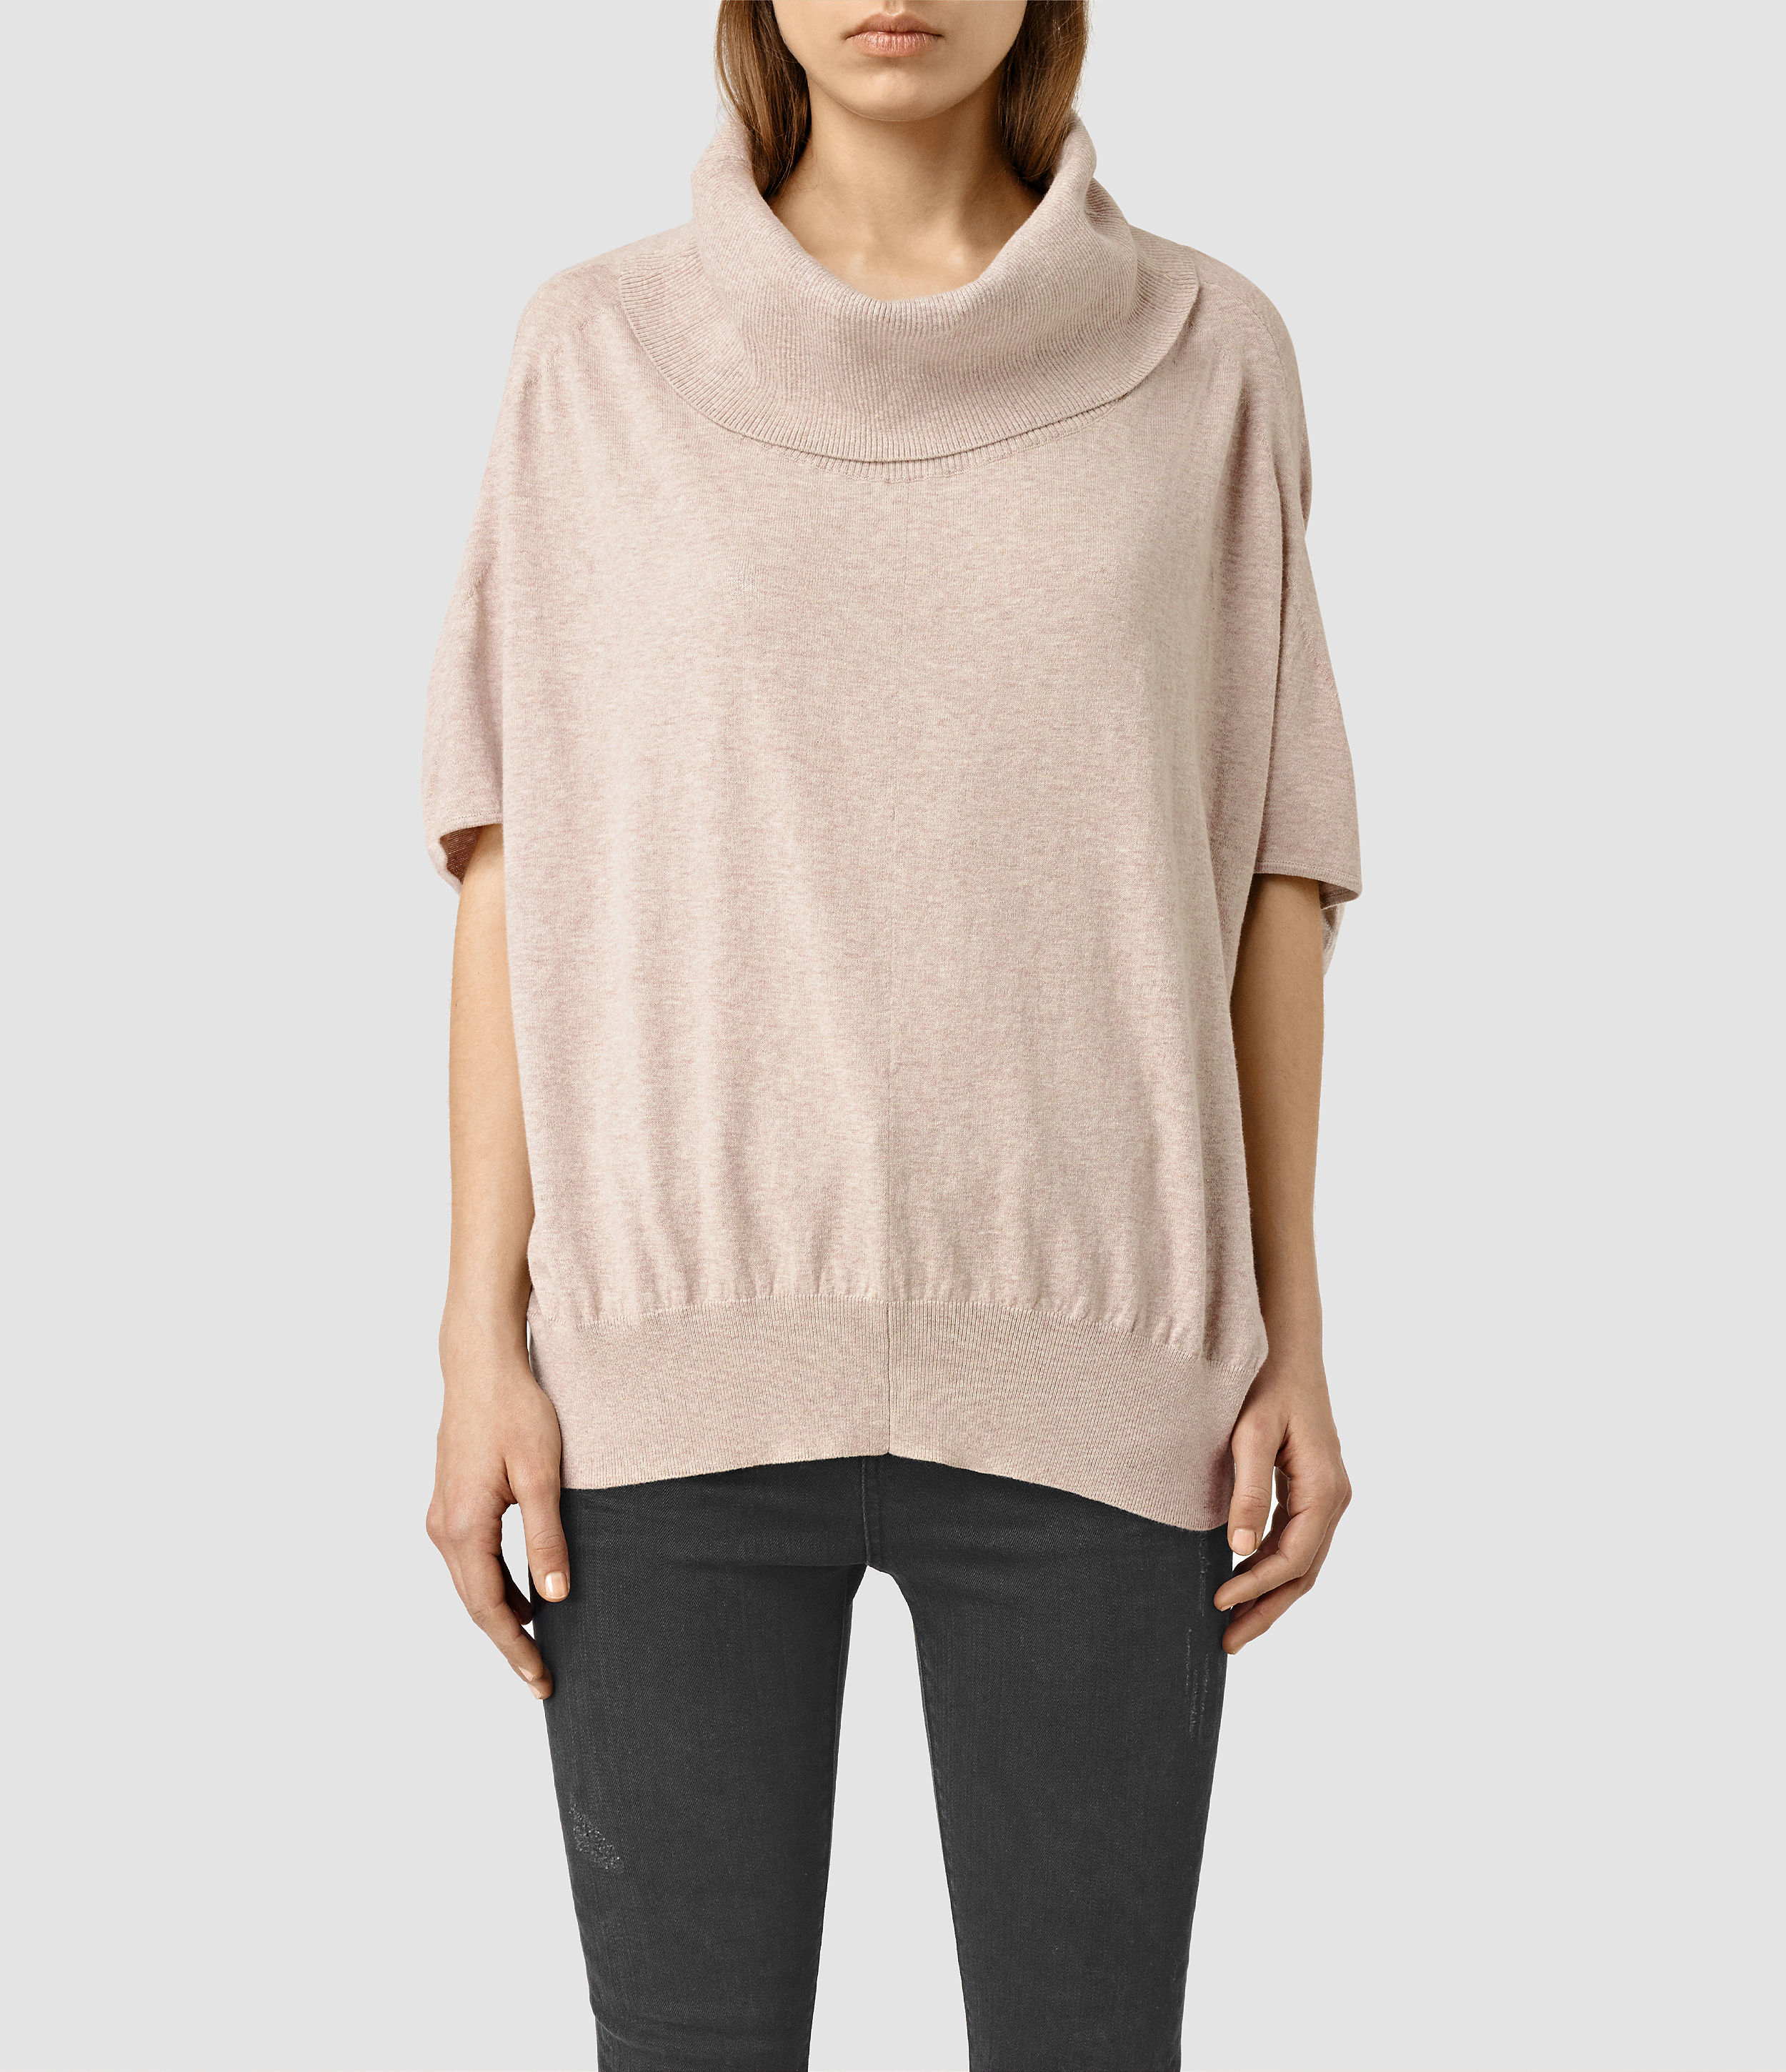 Allsaints Elis Cowl Sweater Usa Usa in Pink | Lyst